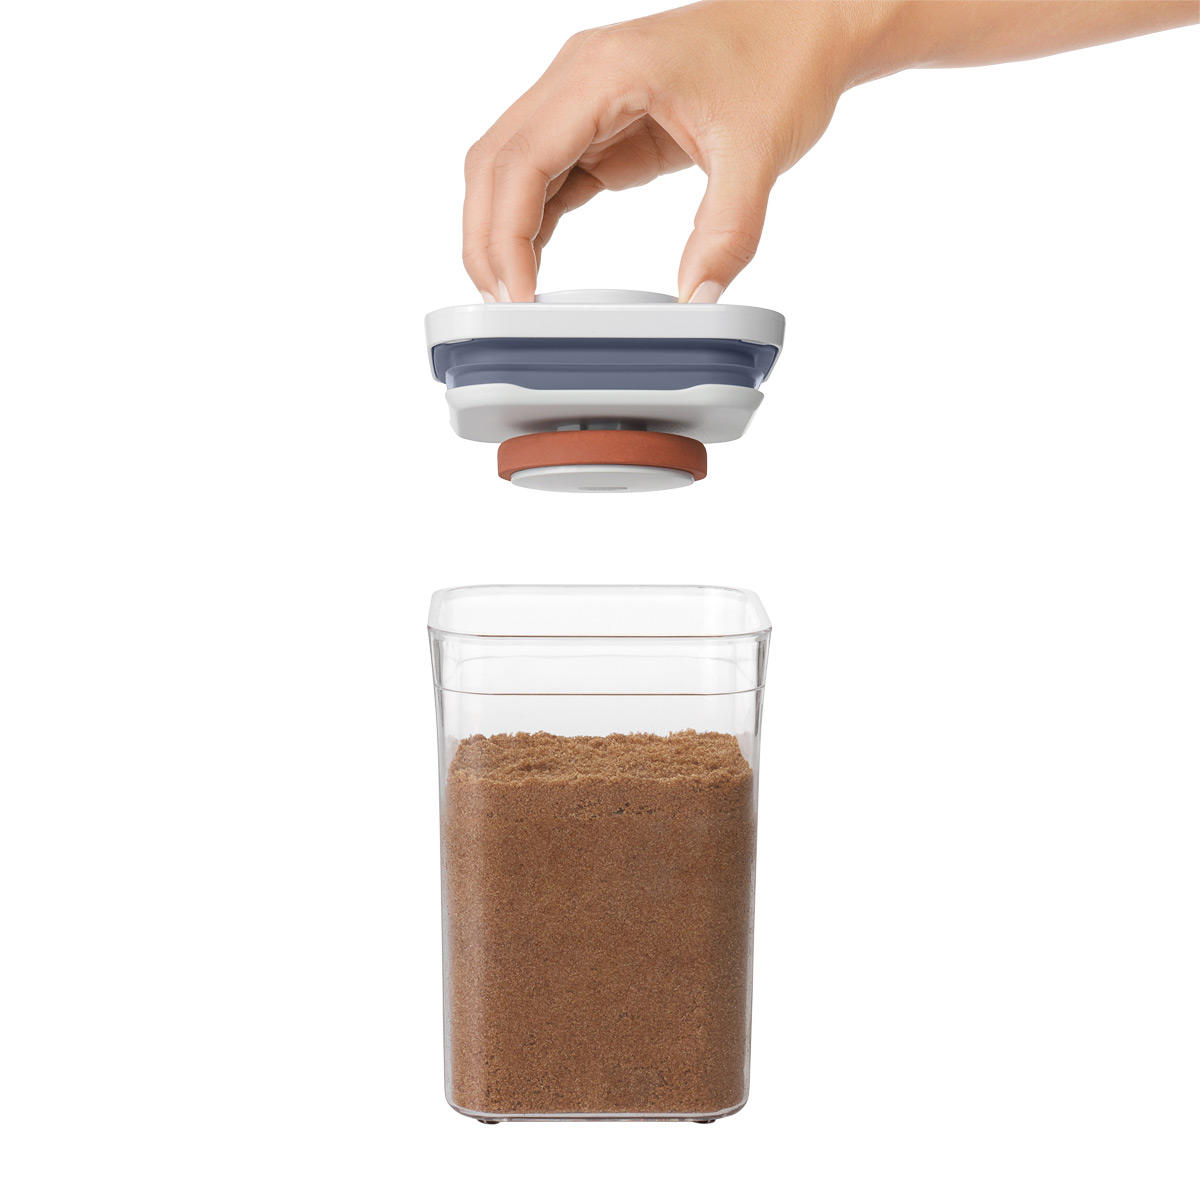 https://www.containerstore.com/catalogimages/368979/10075024-OXO-POP-Brown-Sugar-Keeper-.jpg